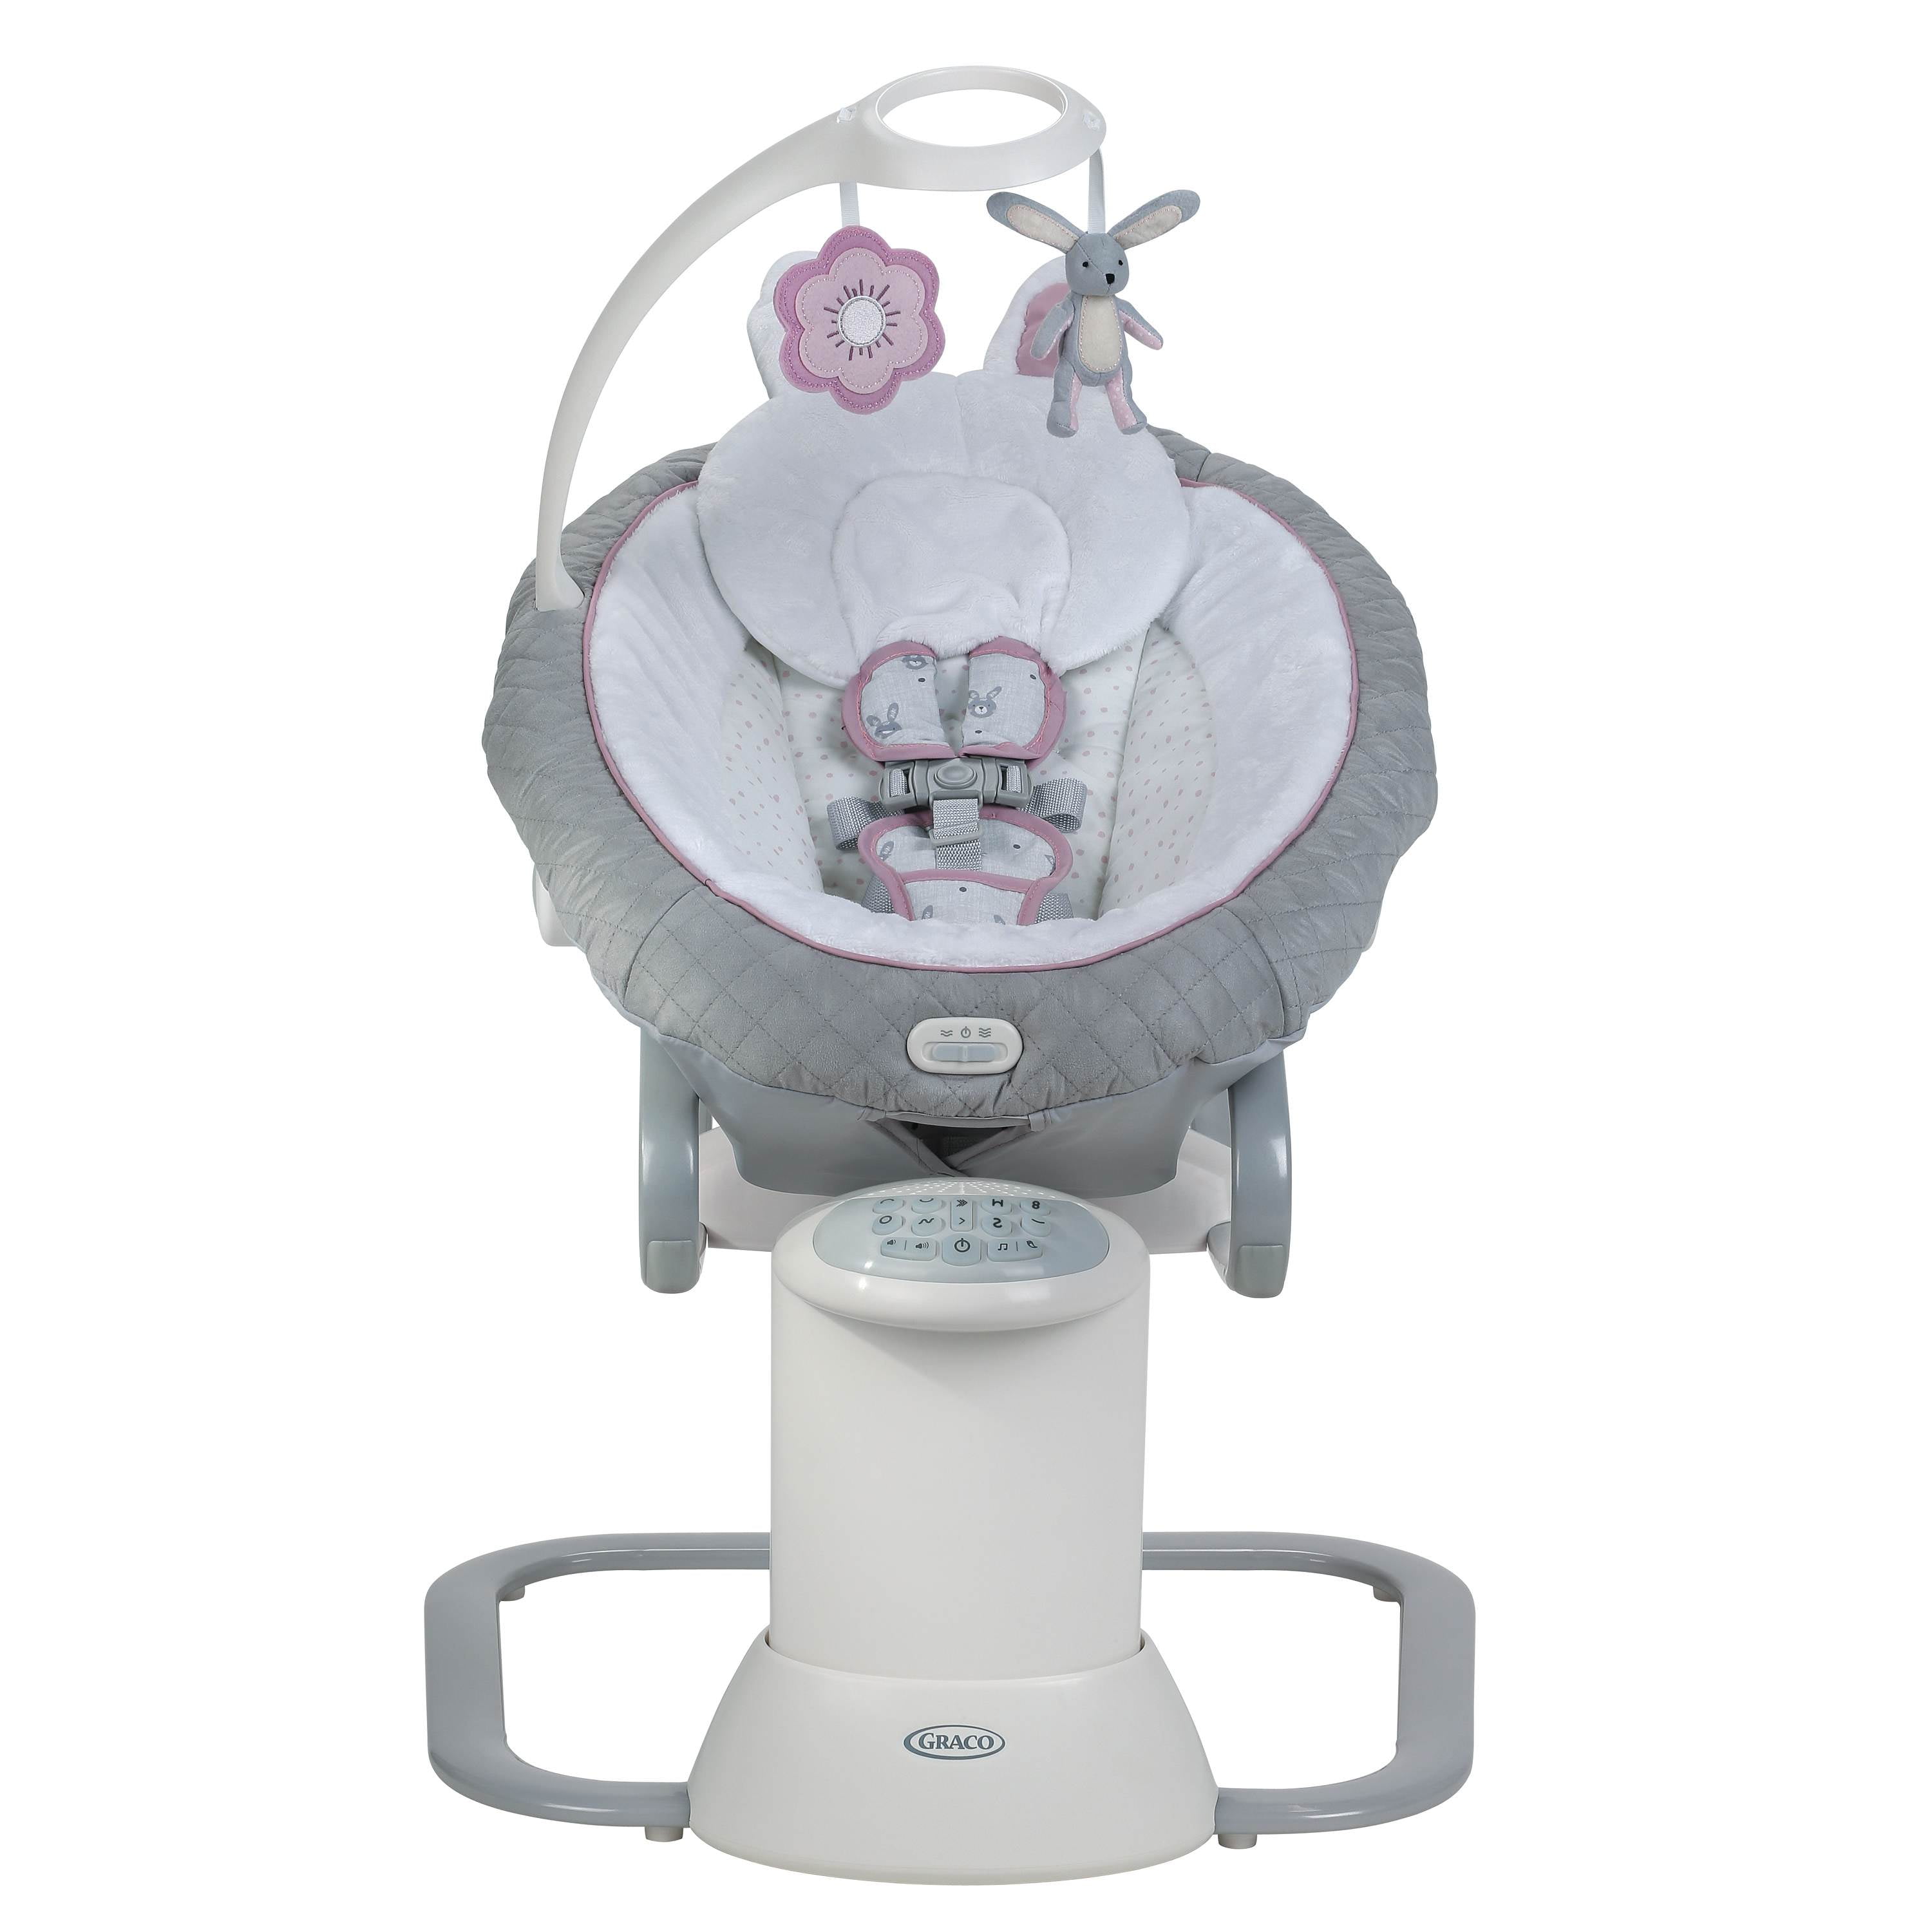 Graco EveryWay Soother Baby Swing Rocker, Josephine Removable with